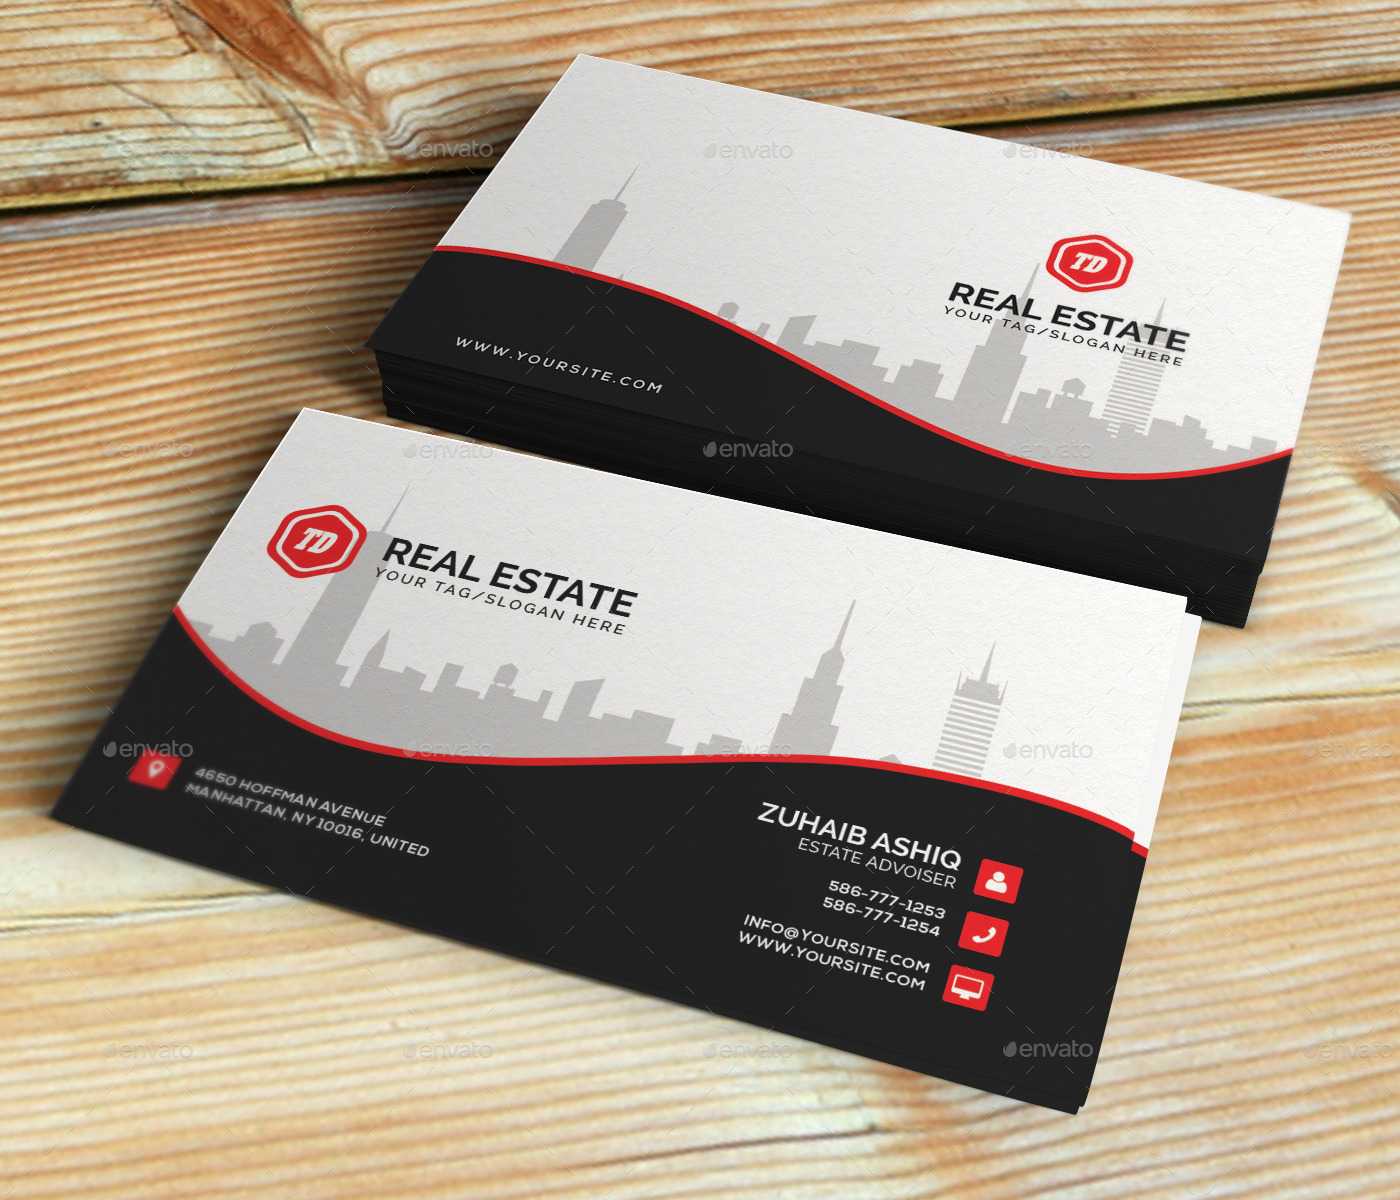 Real Estate – Business Card Template Pertaining To Real Estate Business Cards Templates Free